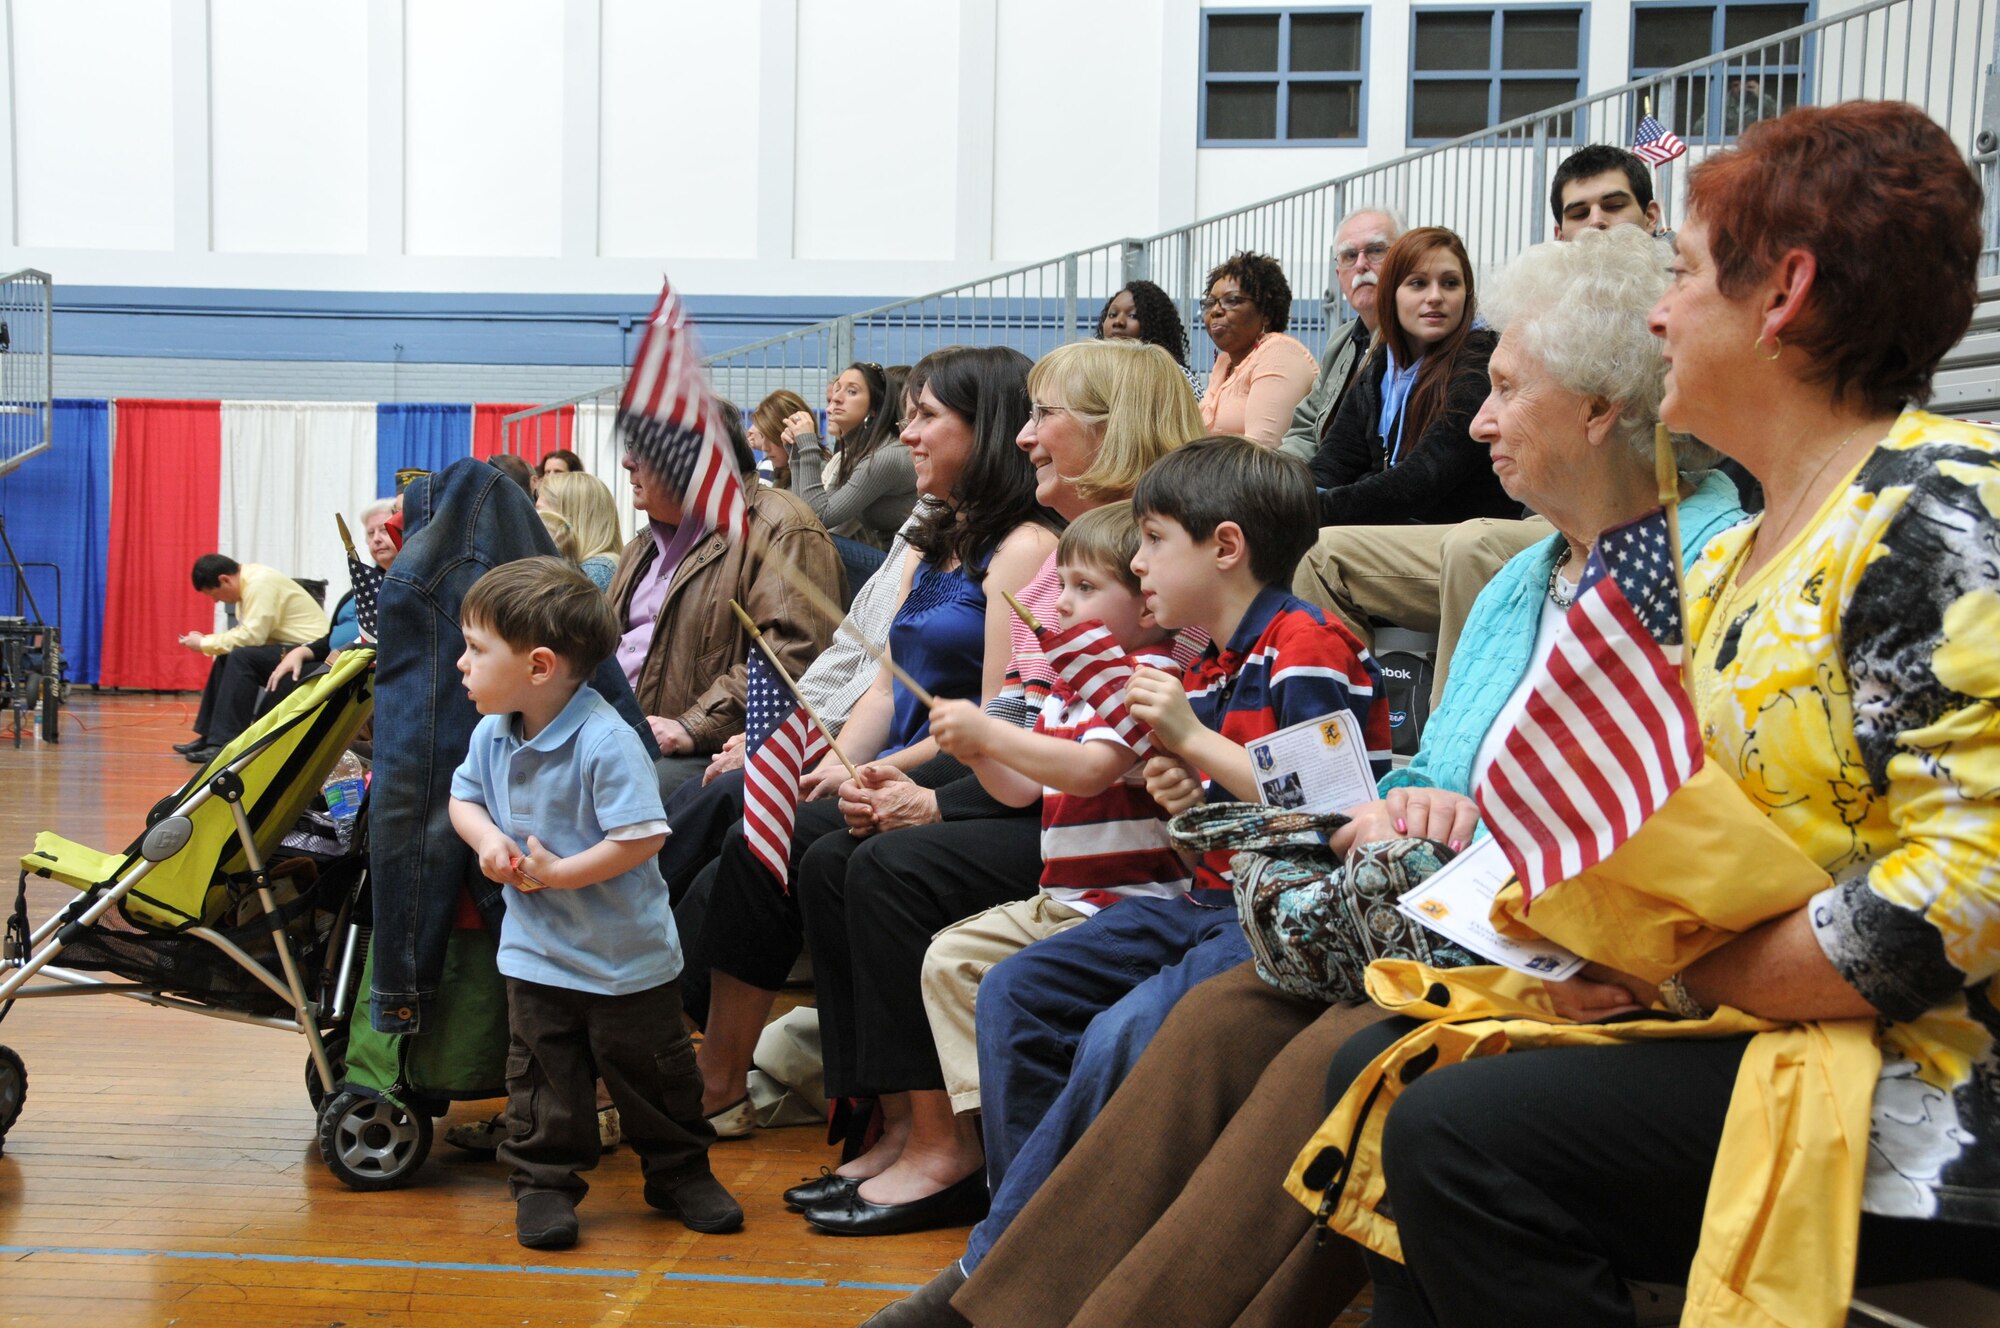 Family members and friends look on as members of the 103rd Air Control Squadron are recognized during a formal send-off ceremony held at the William A. O’Neill Armory in Hartford April 25, 2012. The Connecticut Air National Guard unit has been mobilized and will deploy to Southwest Asia in support of Operation Enduring Freedom. (U.S. Air Force photo by Tech. Sgt. Erin McNamara\RELEASED)